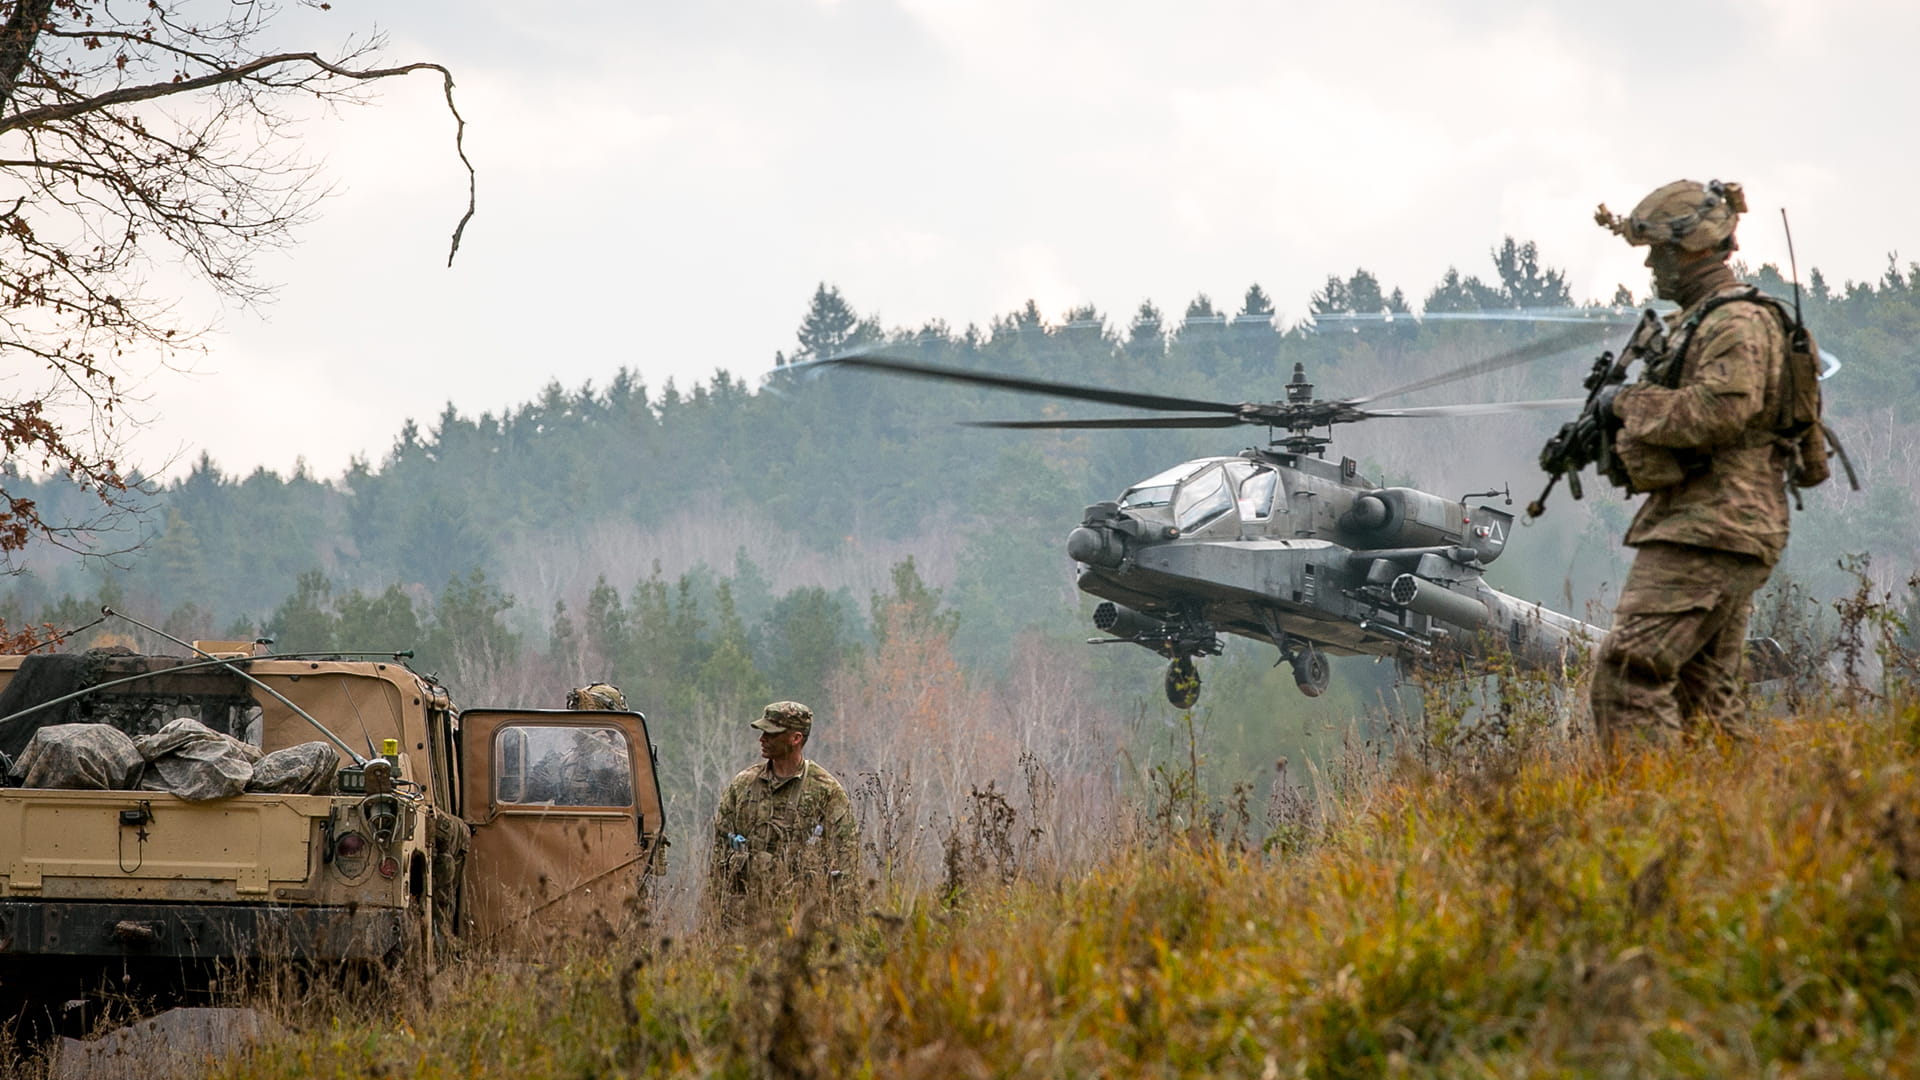 Soldiers and helicopter during mission